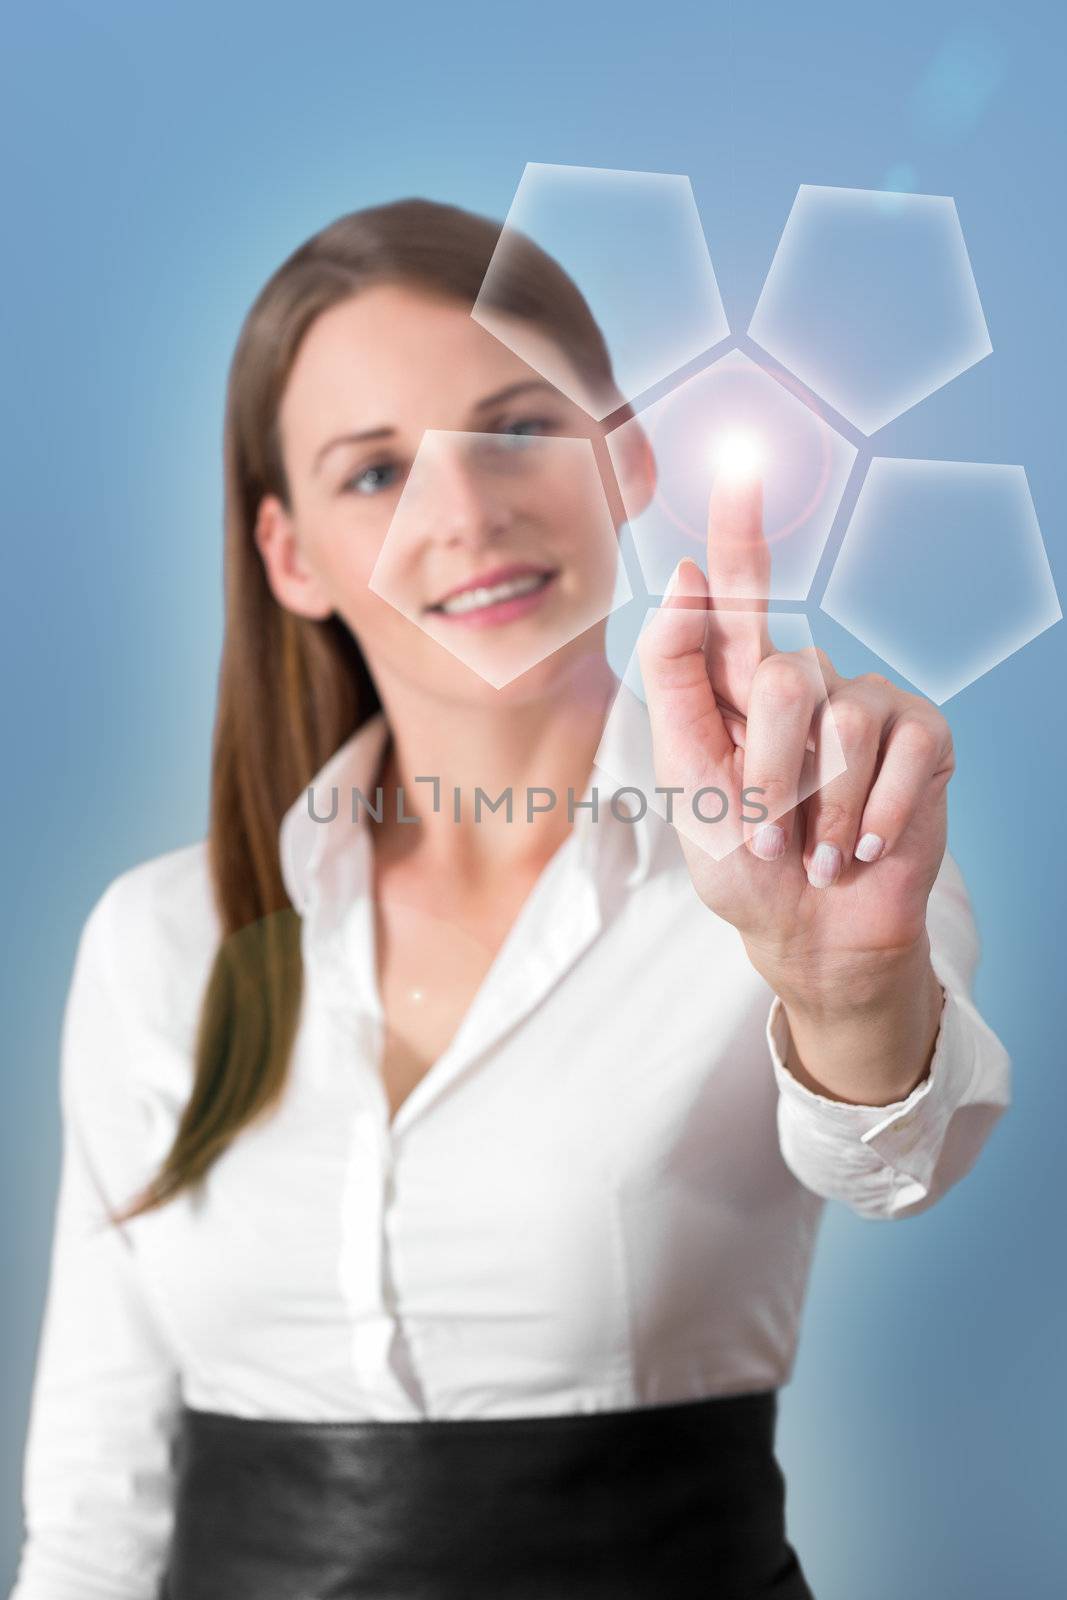 Attractive Brunette Woman Pressing Virtual Button with a light blue background